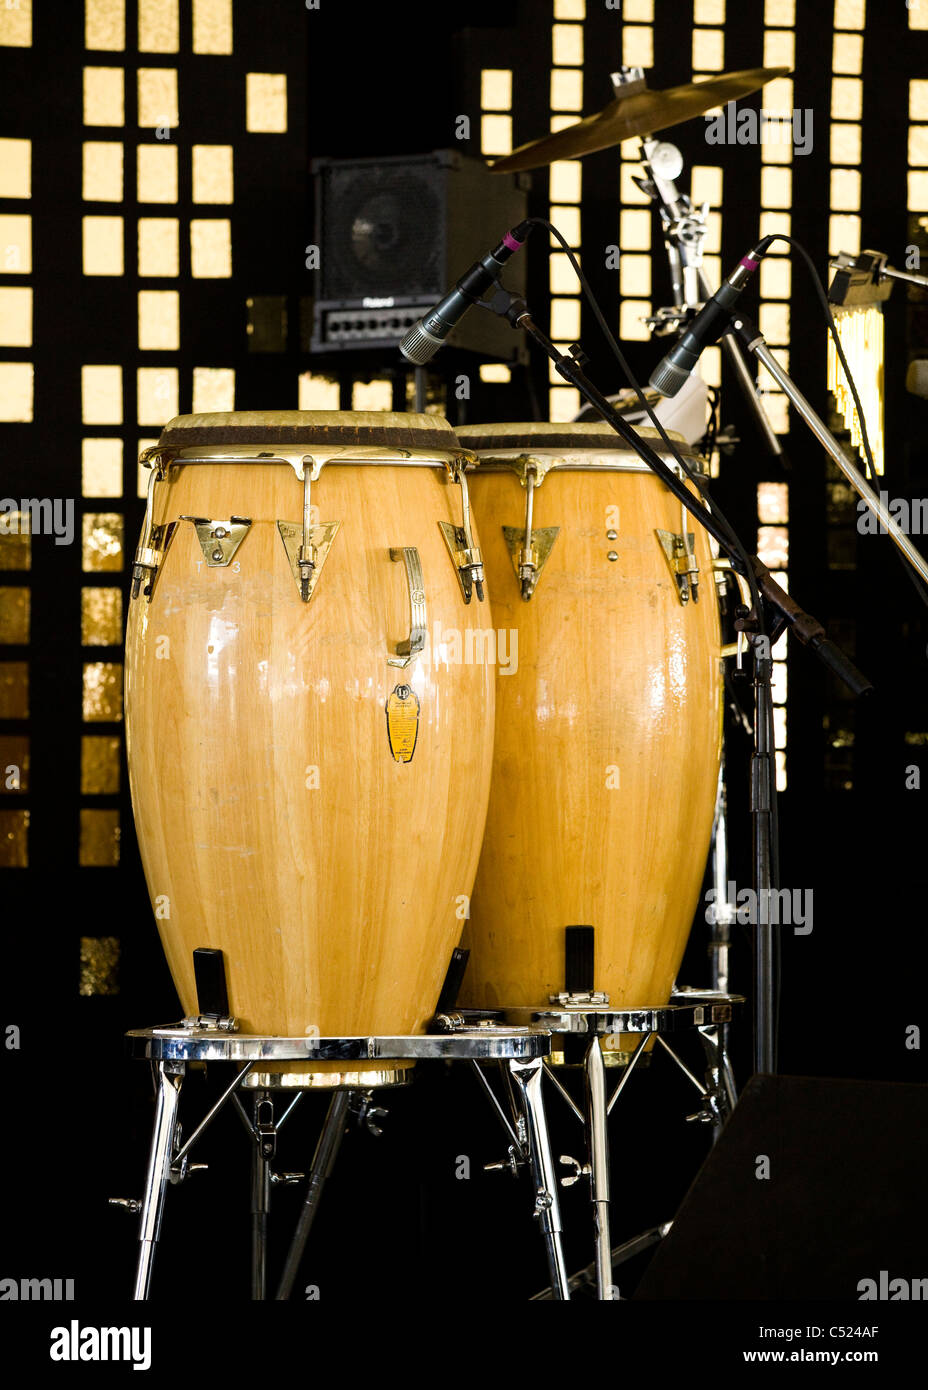 Conga drums on stage Stock Photo